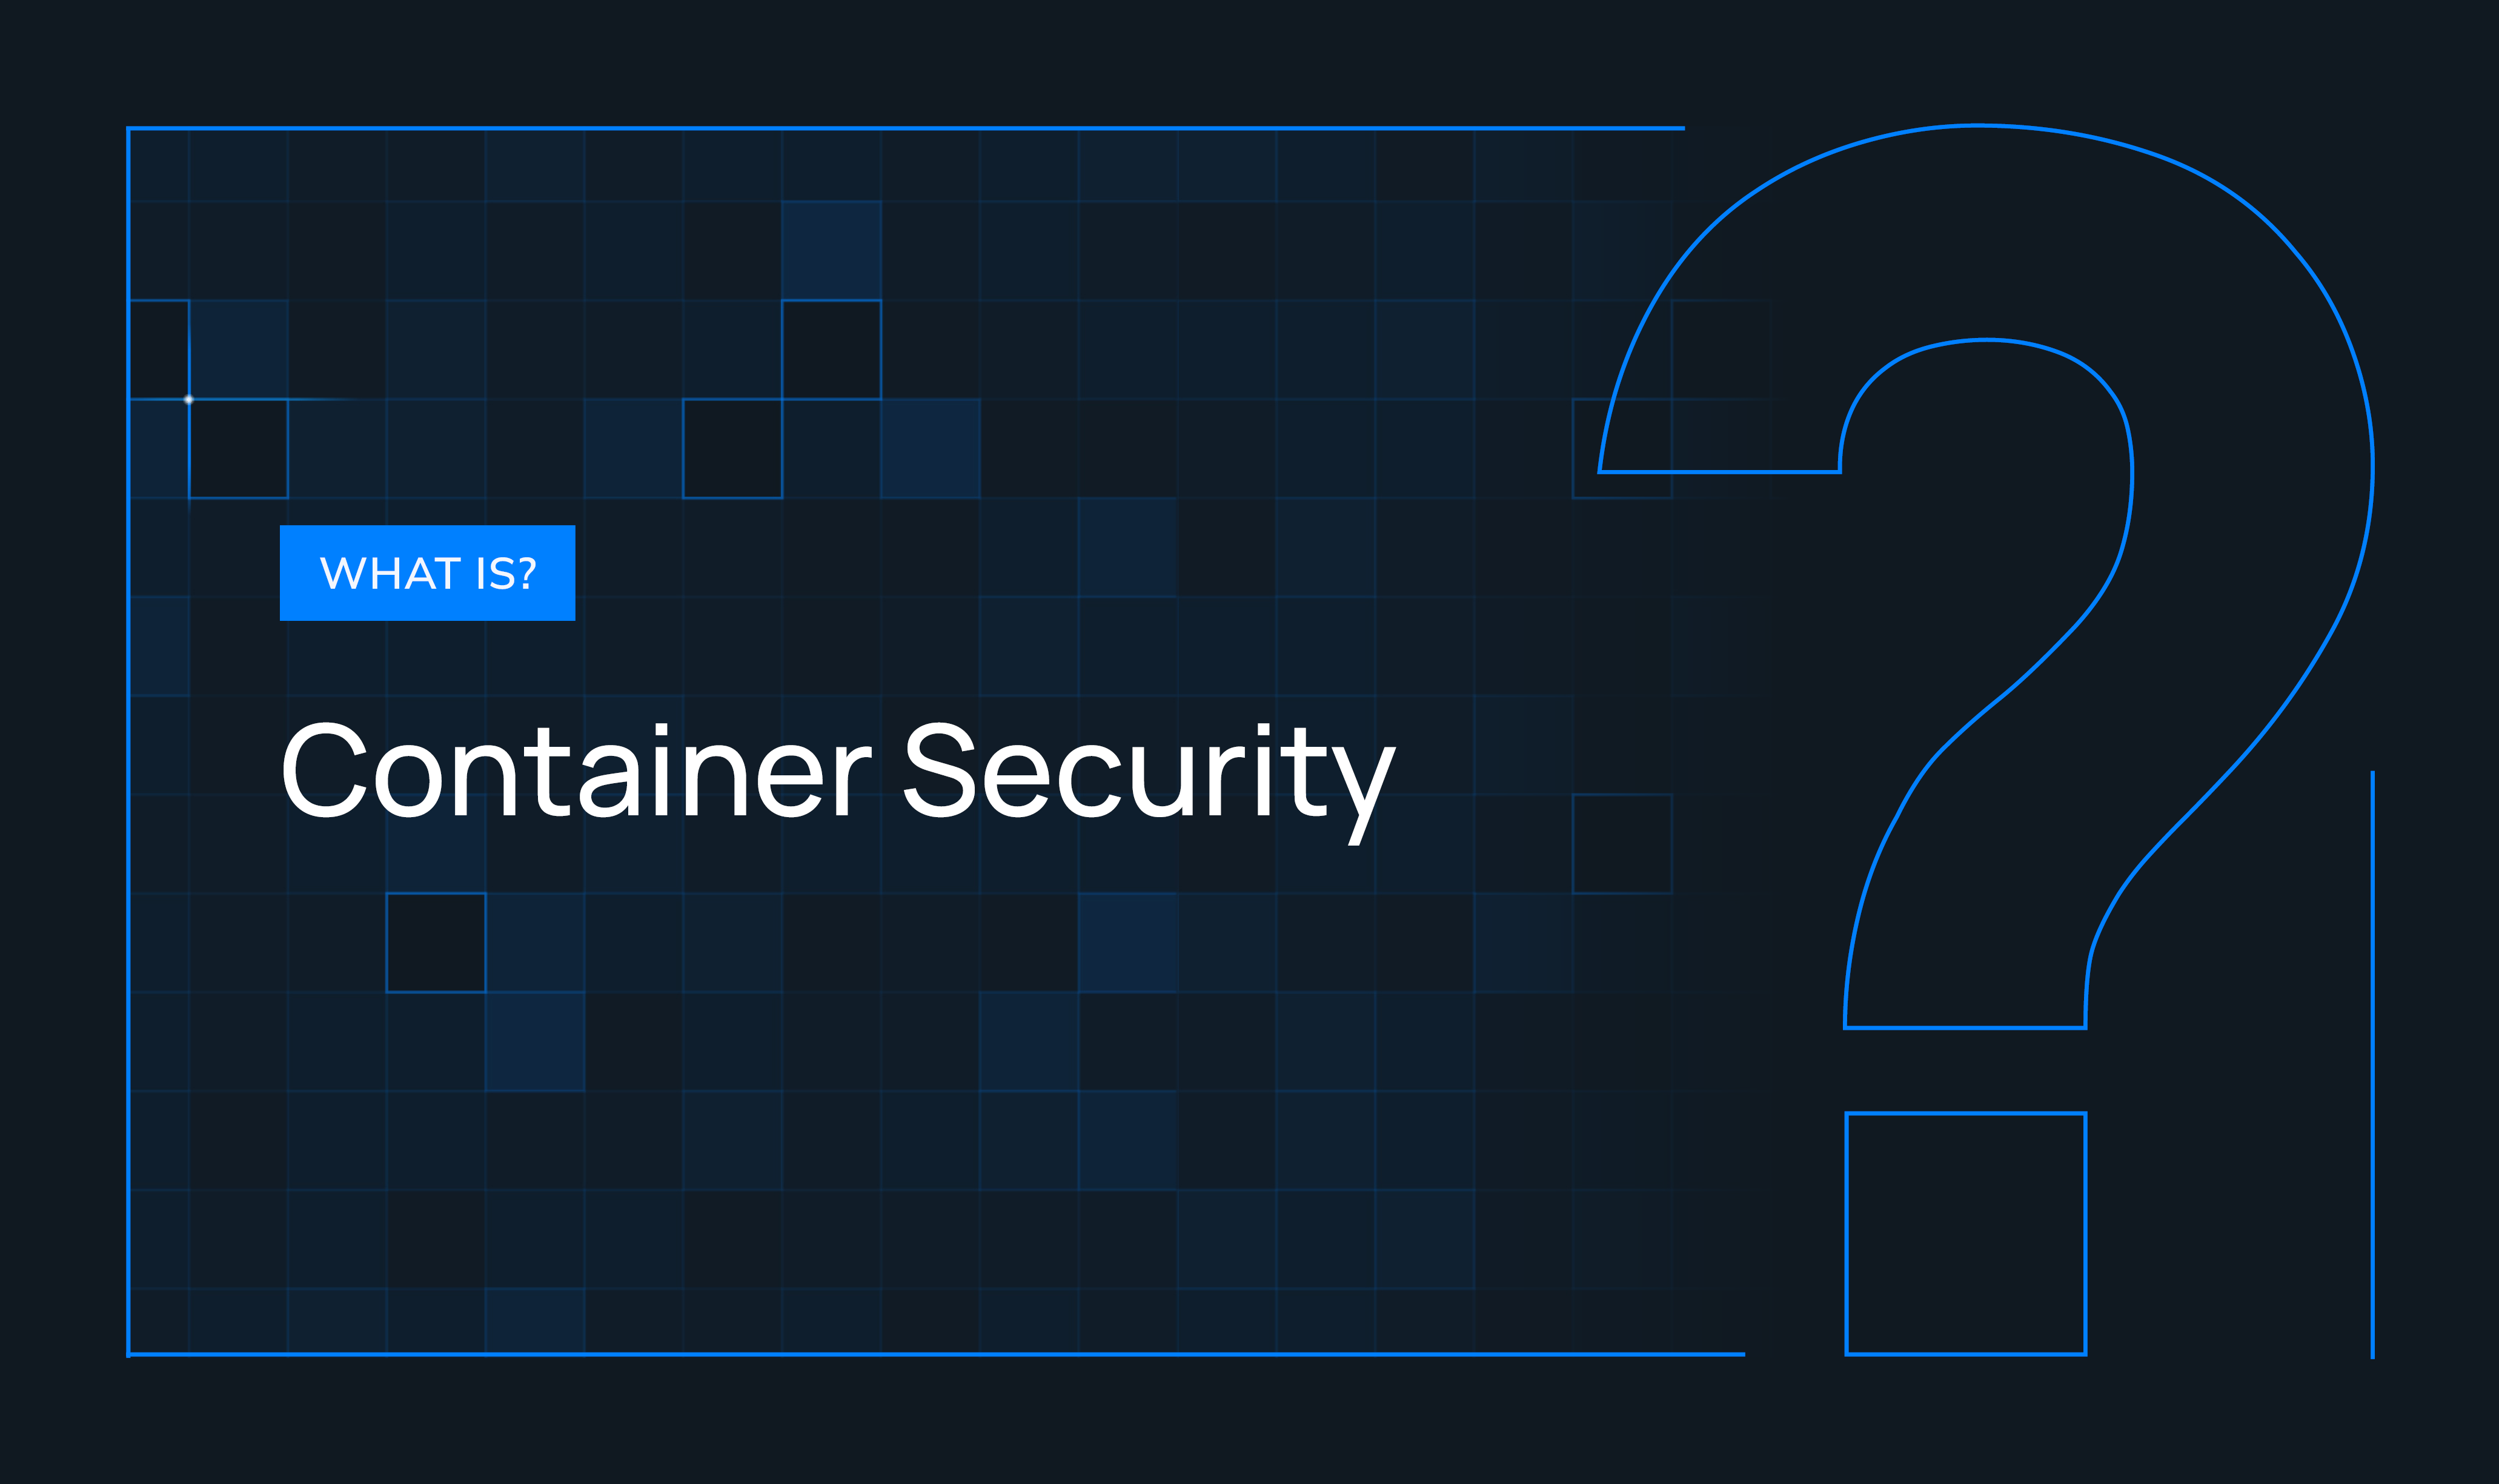 What is Container Security?